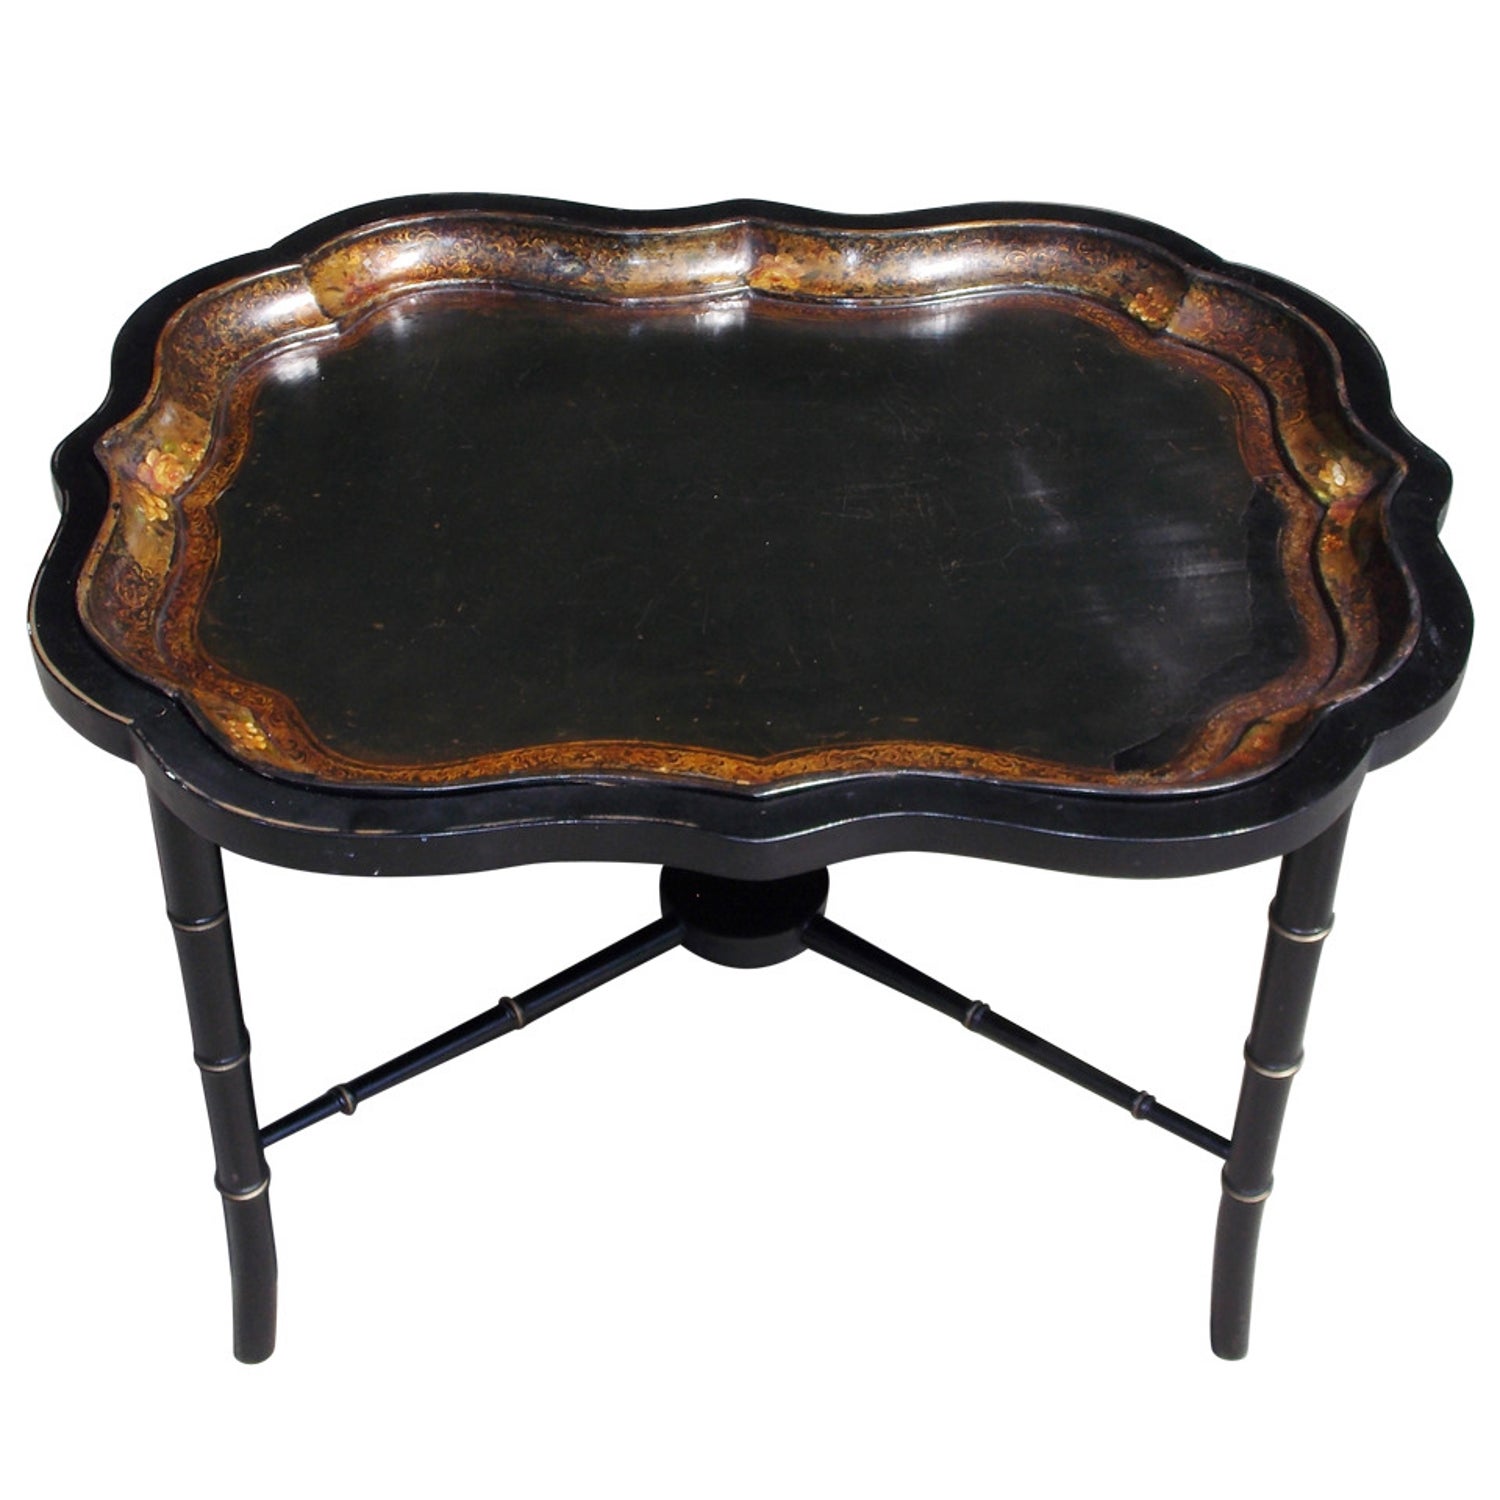 English Scalloped Paper Mache Tray on Stand. Circa 1815 For Sale at 1stDibs